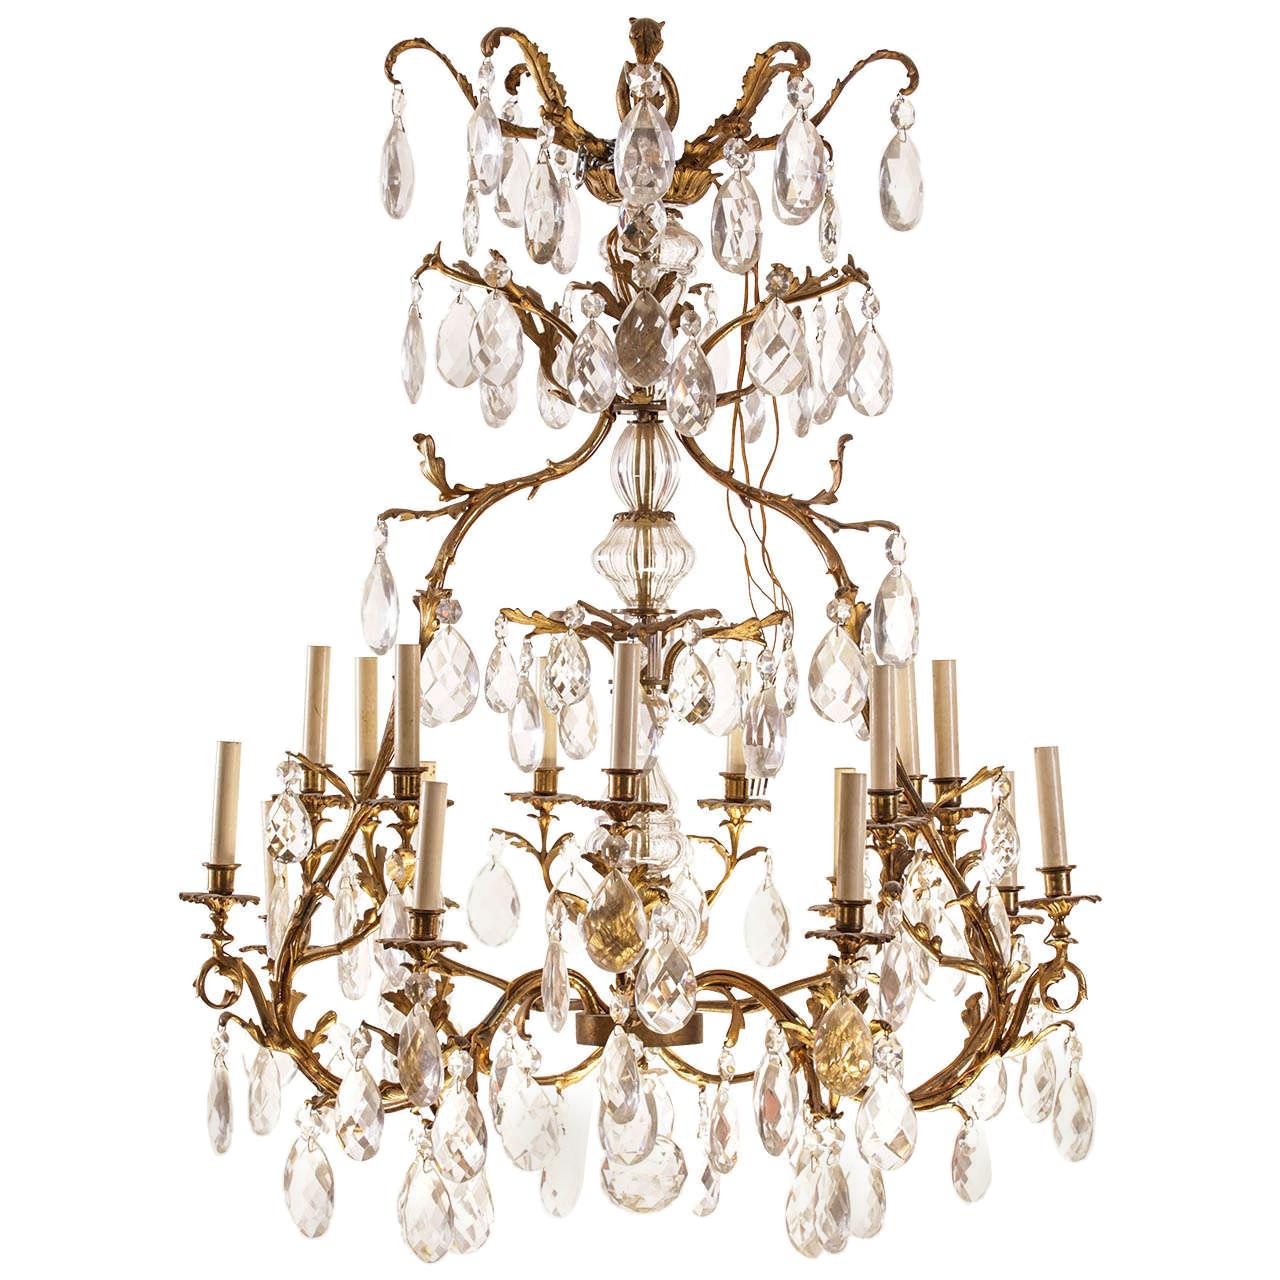 French Gilt Bronze and Cut-Glass, 14-Light Chandelier, 19th Century